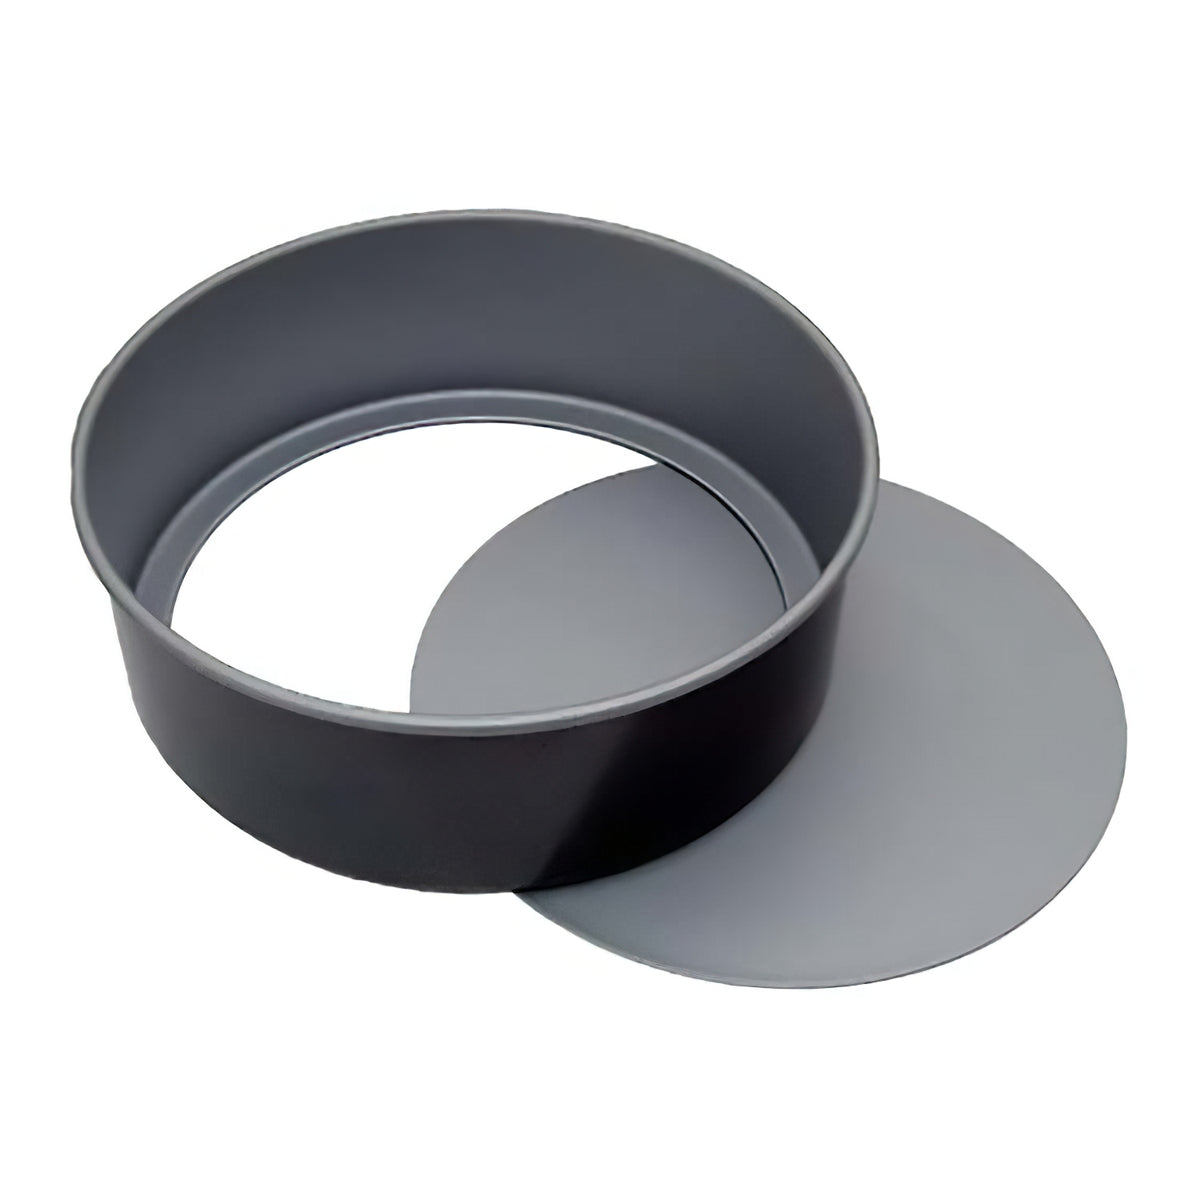 SUNCRAFT Patissier Series Steel Round Cake Pan with Removable Bottom